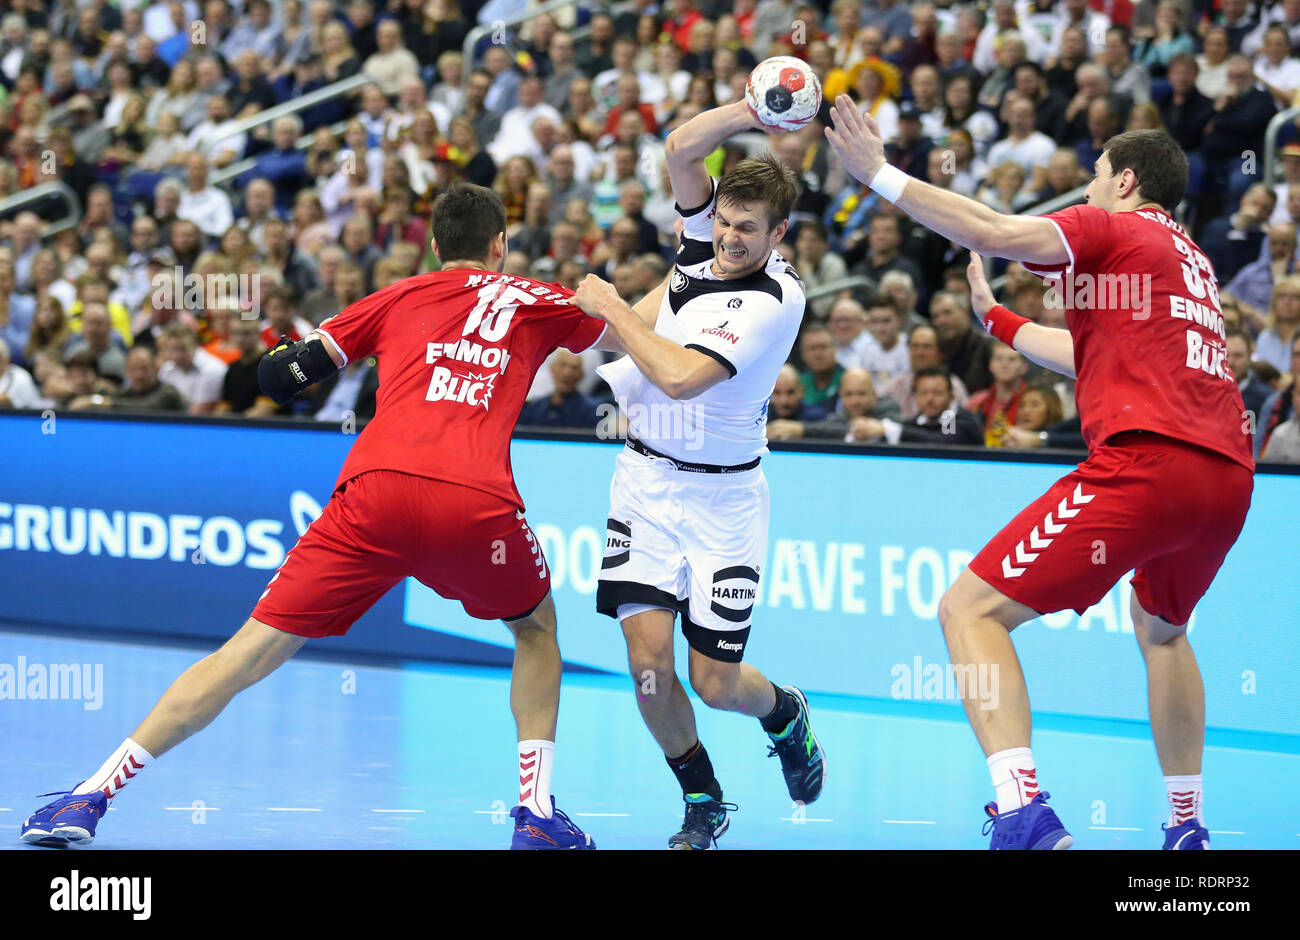 Germany. Germany, 19th January 2019. Fabian Bohm (38) for Germany attempts to get past Drasko Nenadic (15) and Mijajlo Marsenic (33) for Serbia Credit: Mickael Chavet/Alamy Live News Stock Photo